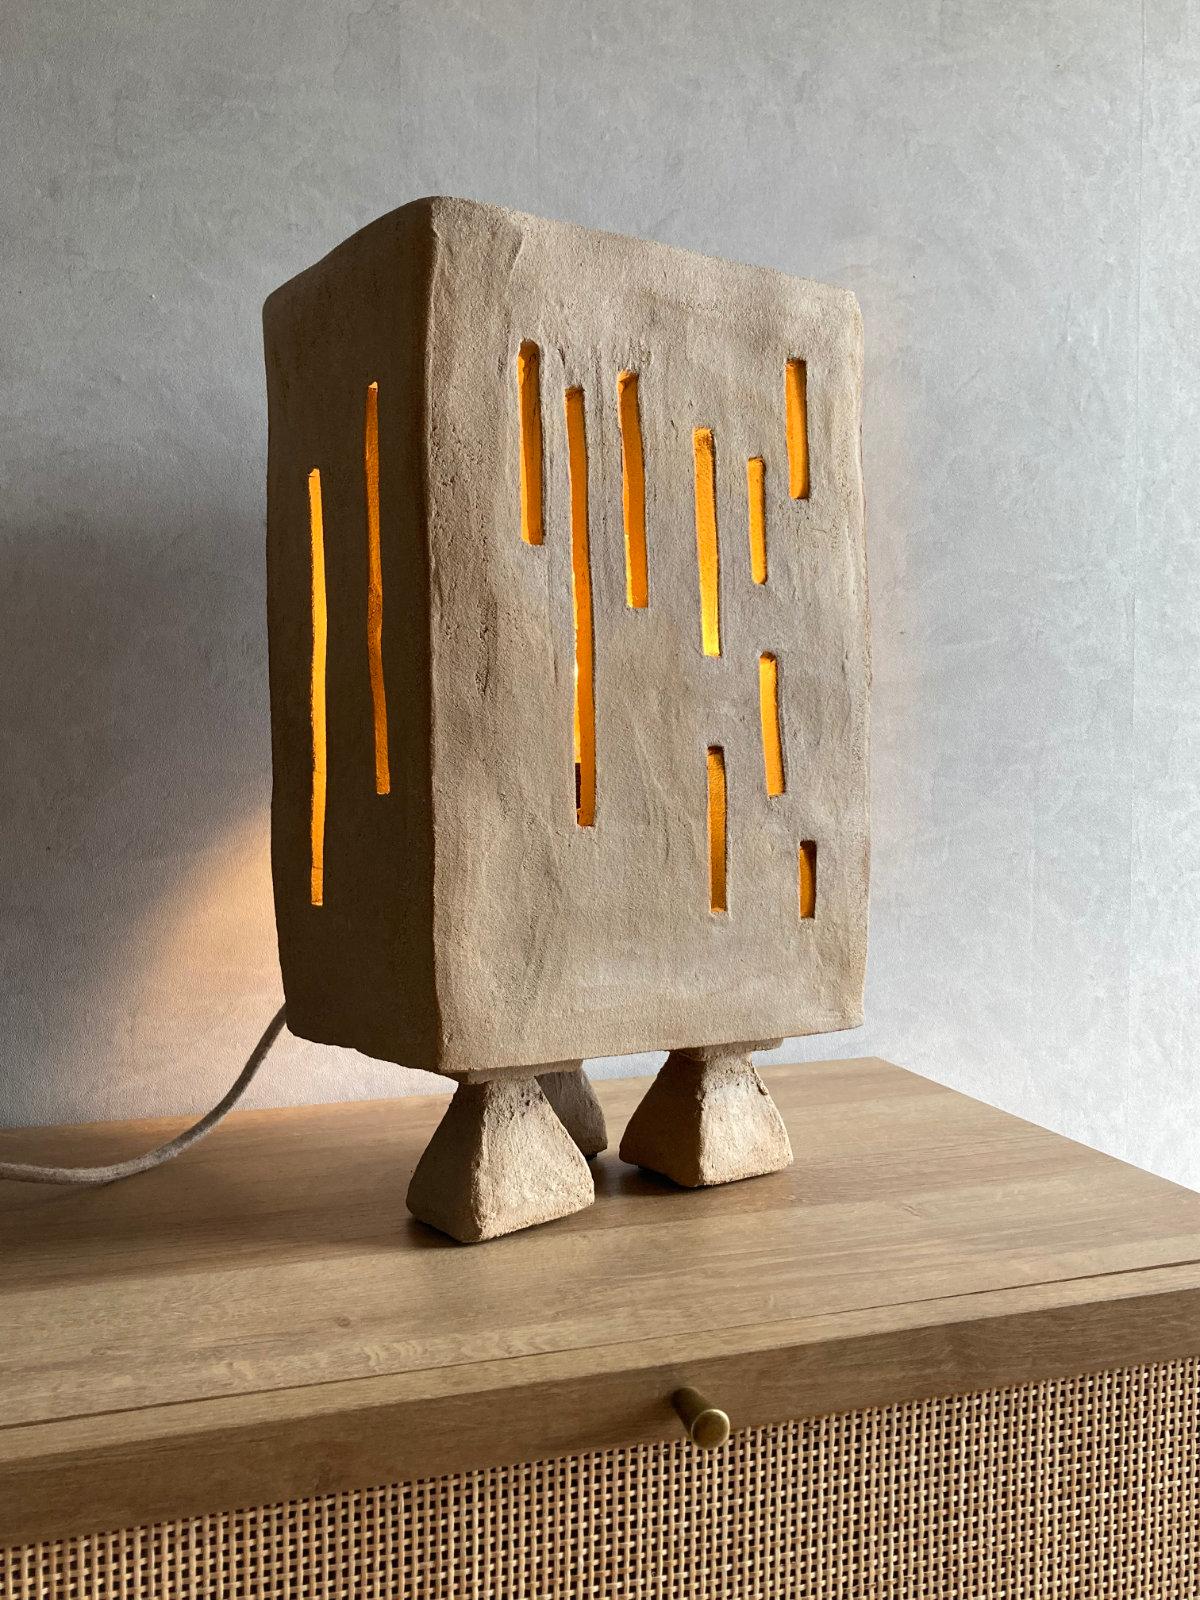 Artefact table lamp by Lea Munsch
Dimensions: W 28 x D 16 x H 49 cm
Materials: Stoneware

Numbered on /20. Each piece is unique with its own personality and marks. There is an opening on the back to slide in a lightbulb.

Sand. As far as the eye can